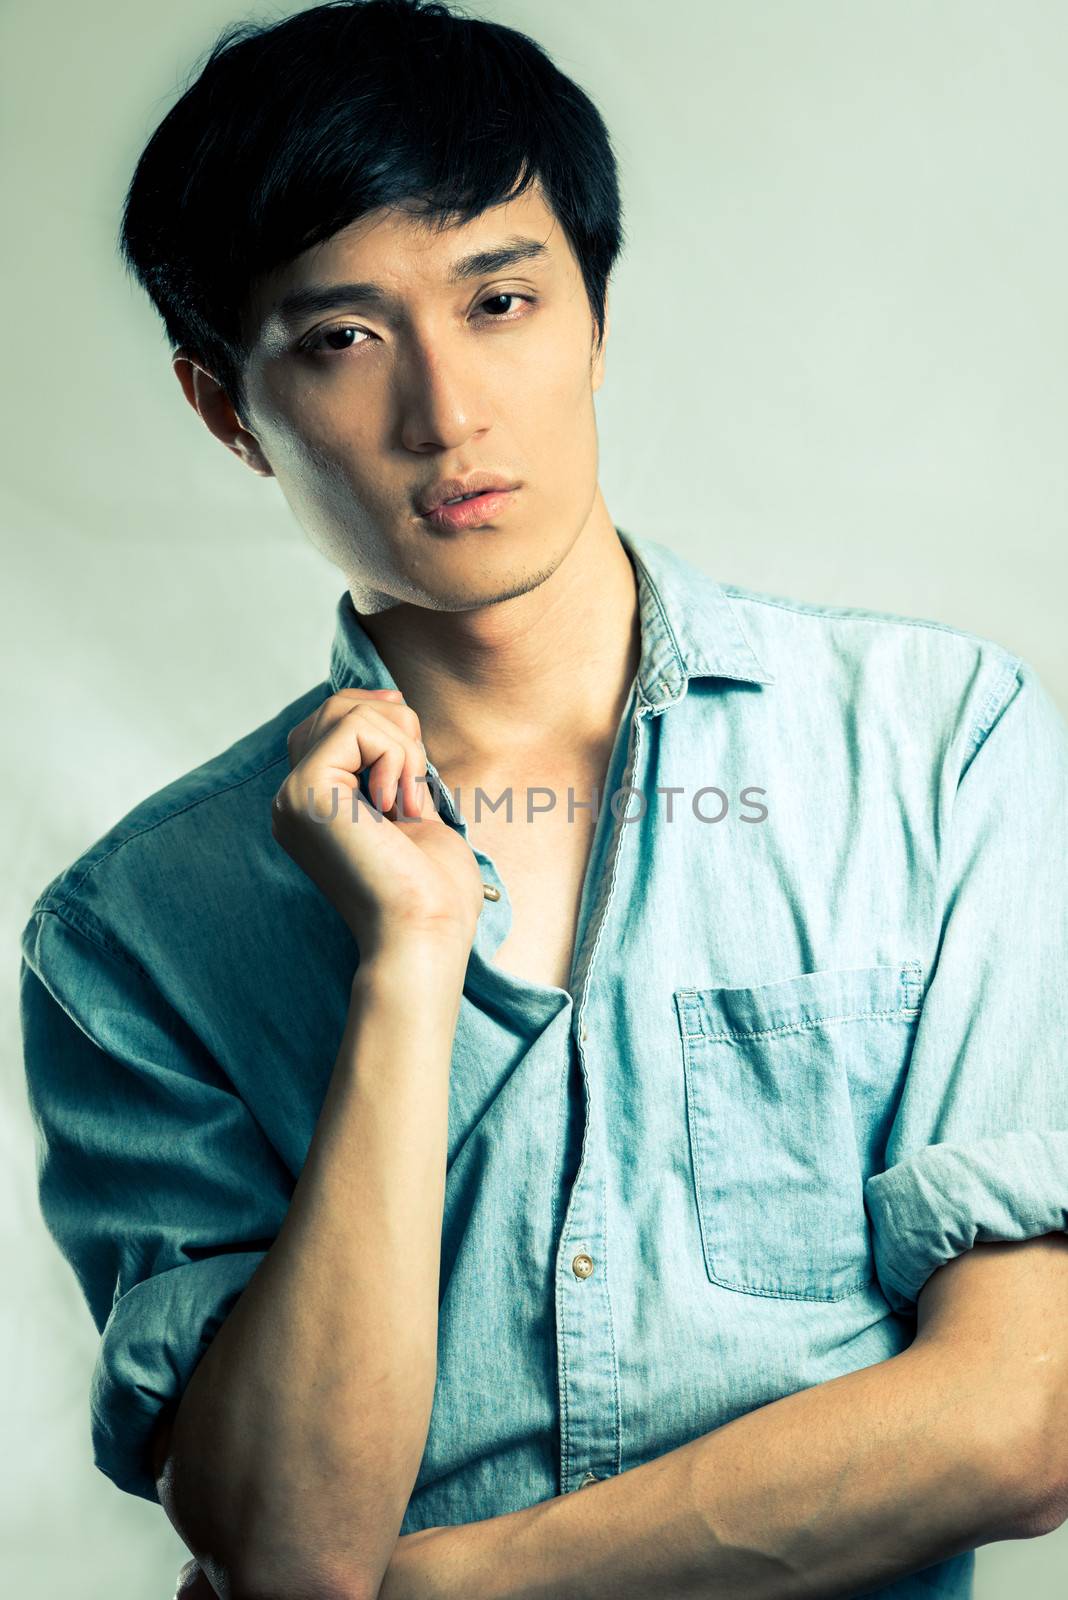 Studio fashion pose by a handsome young male model, with fashion tone and background